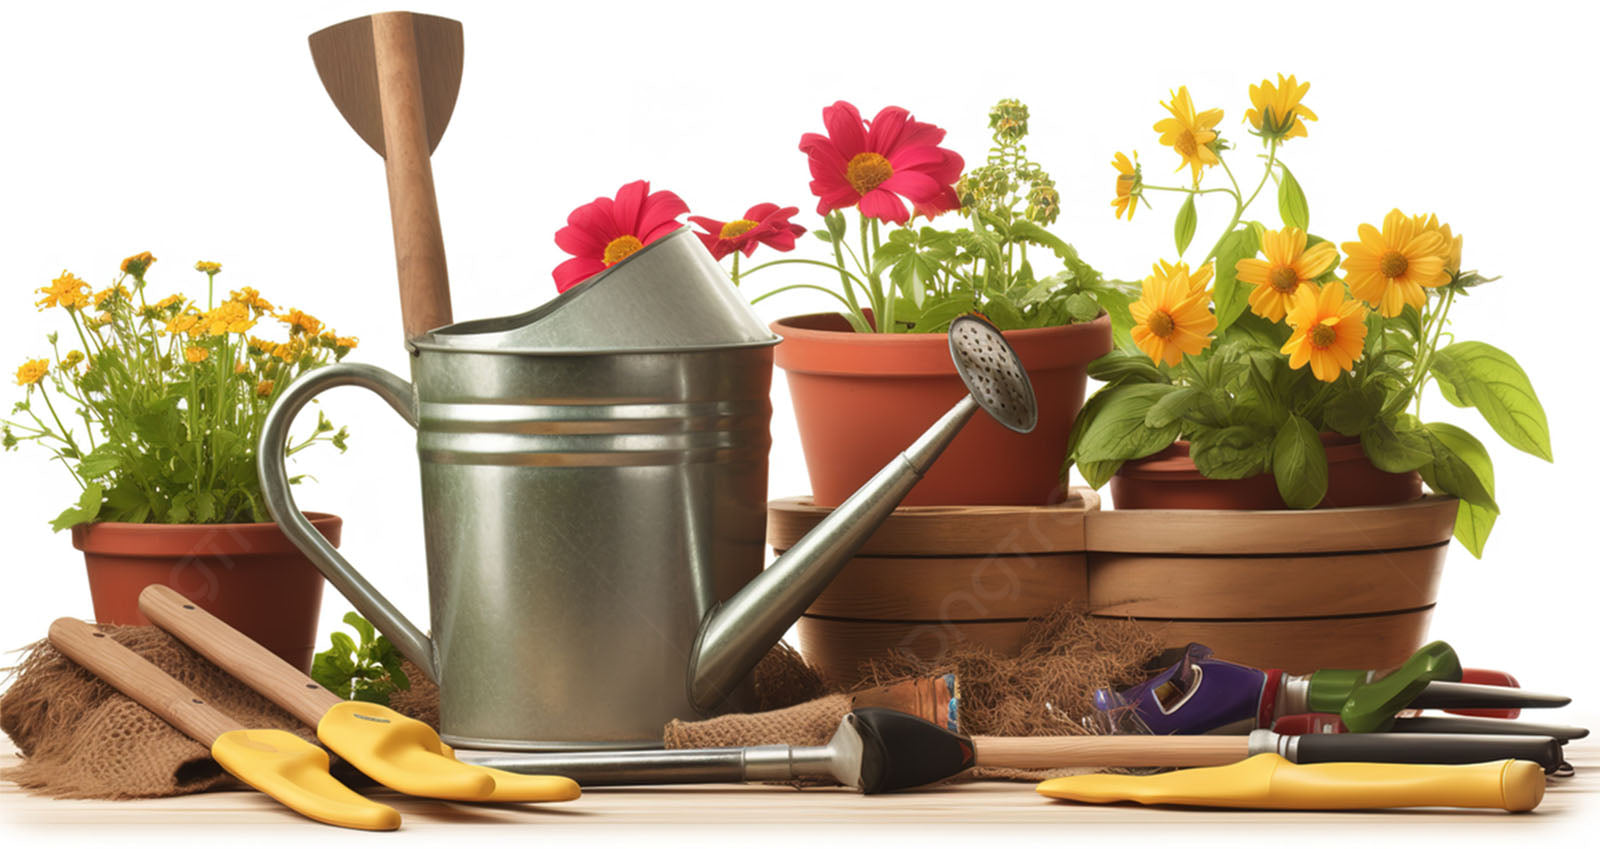 an image of gardening tools with potted plants